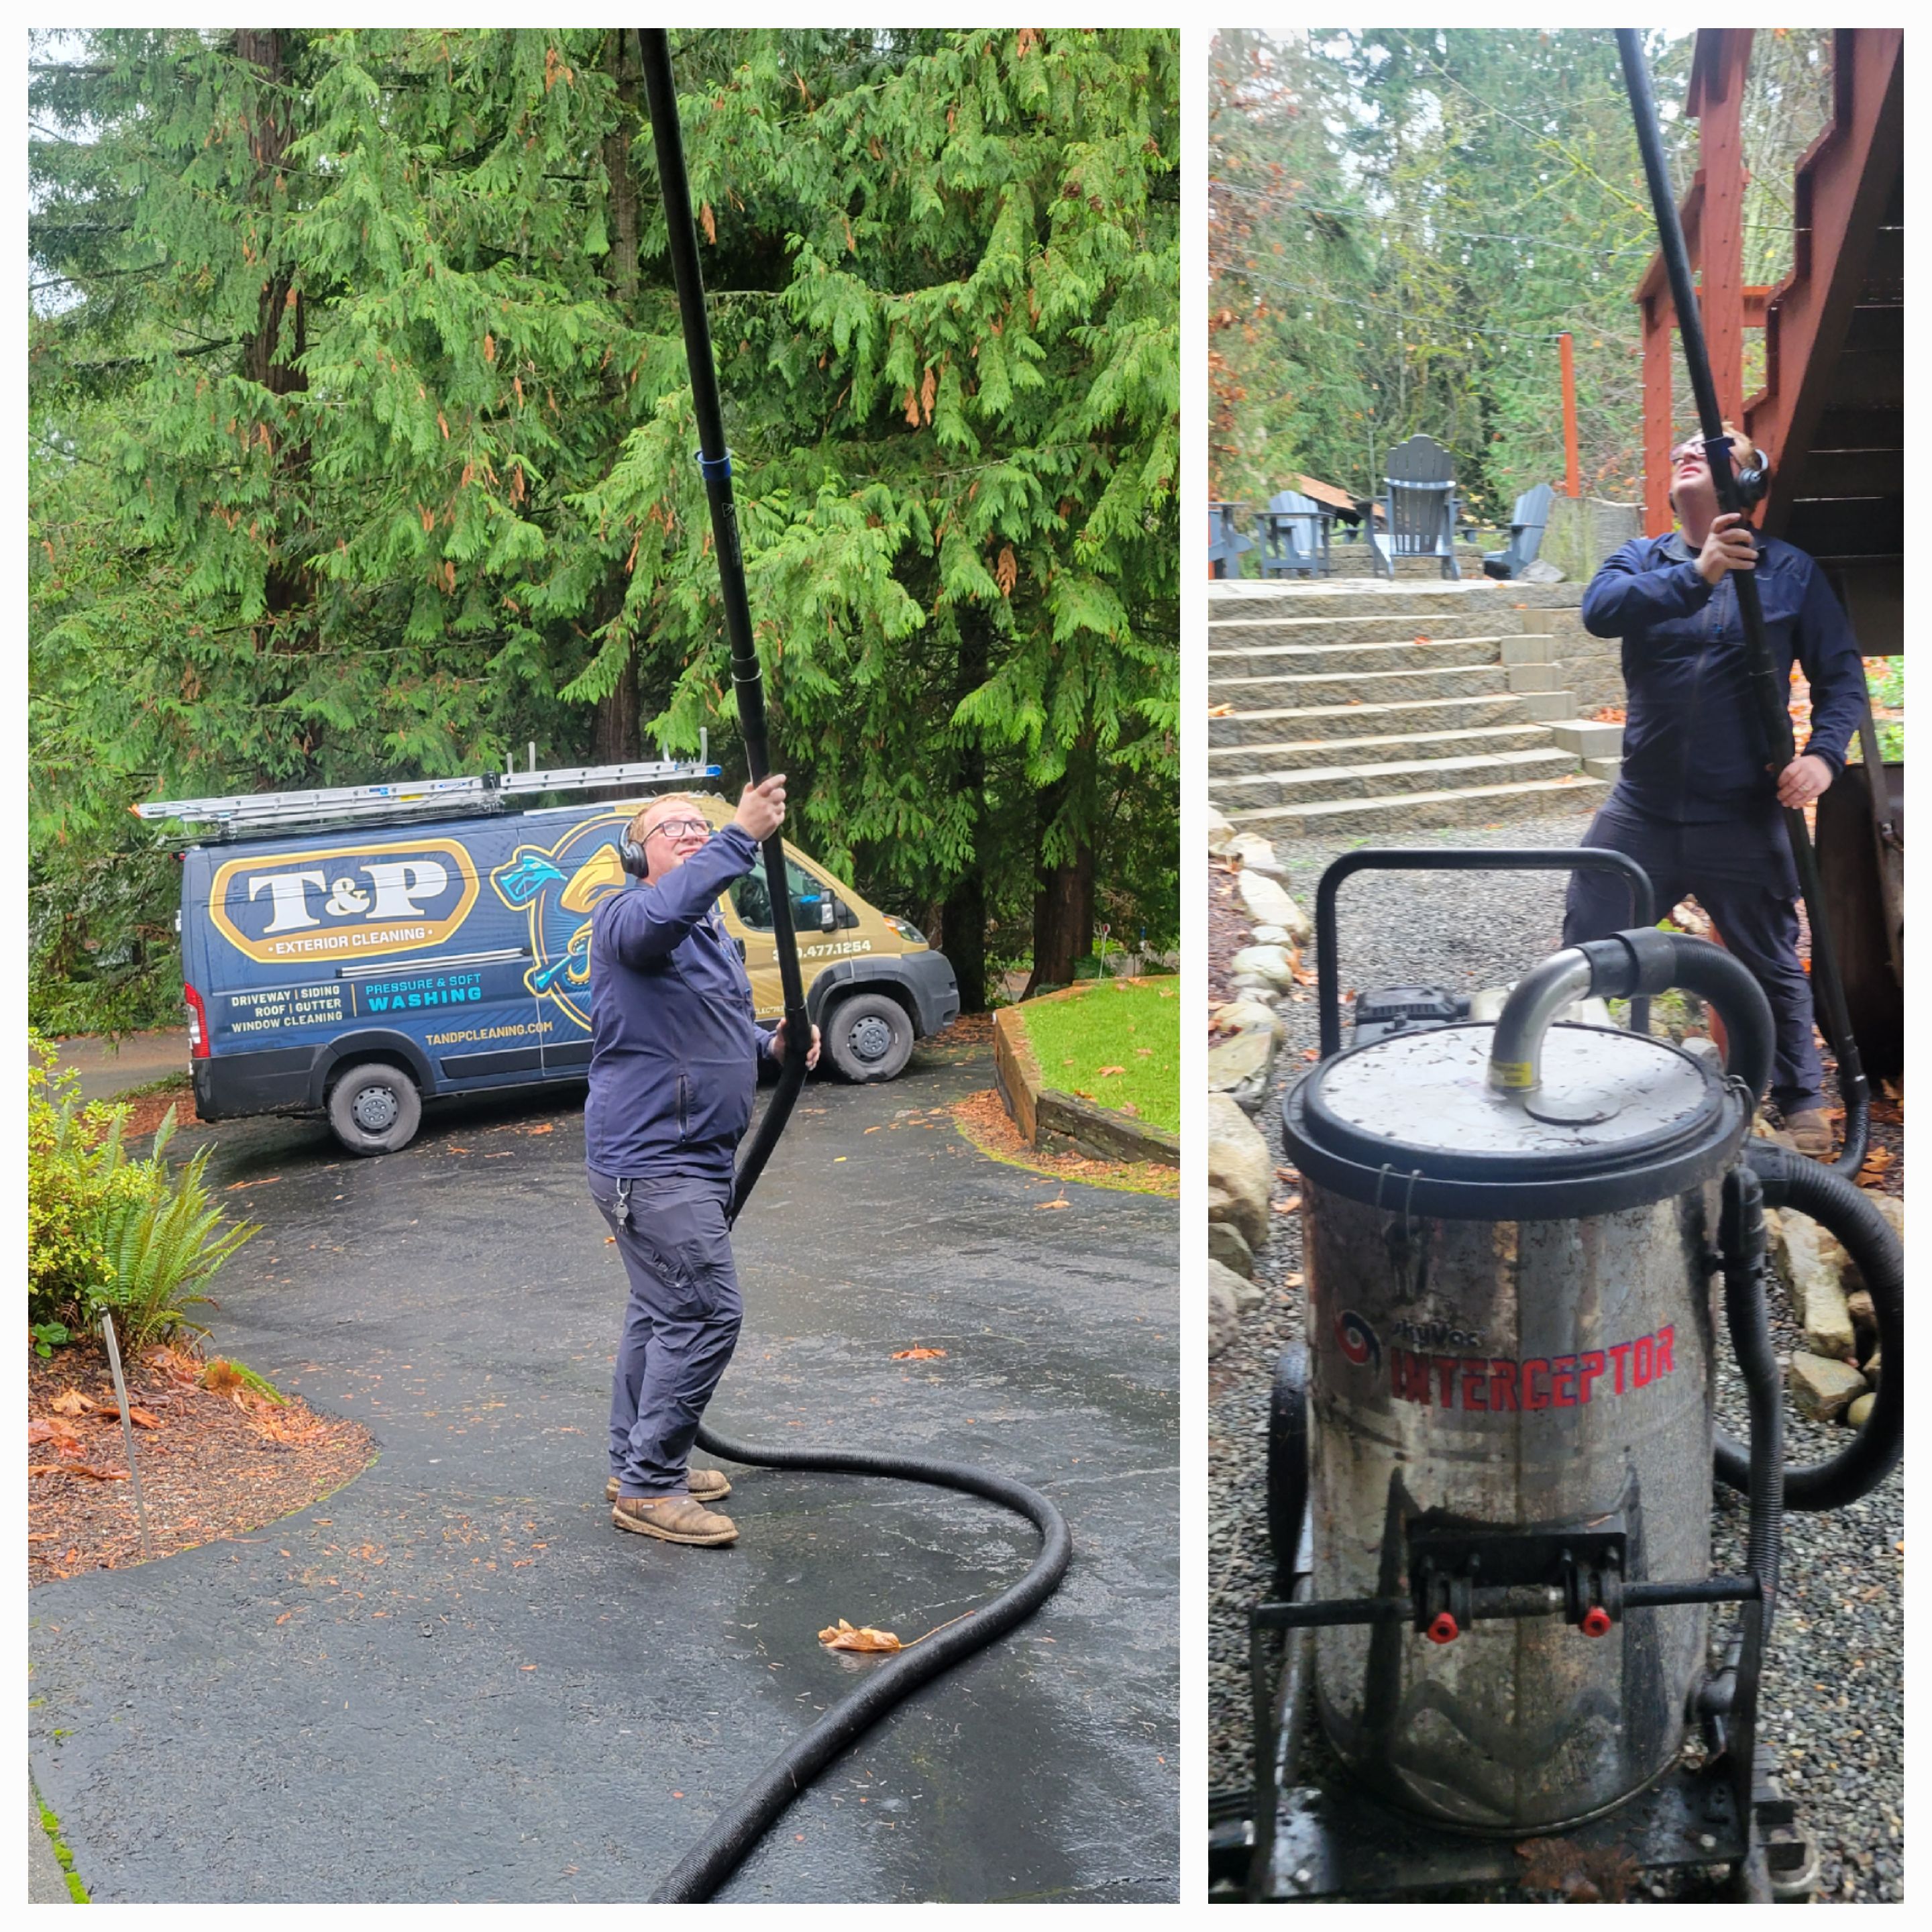 Regular Gutter Cleaning Performed for a Mirrormont Home in Issaquah, WA